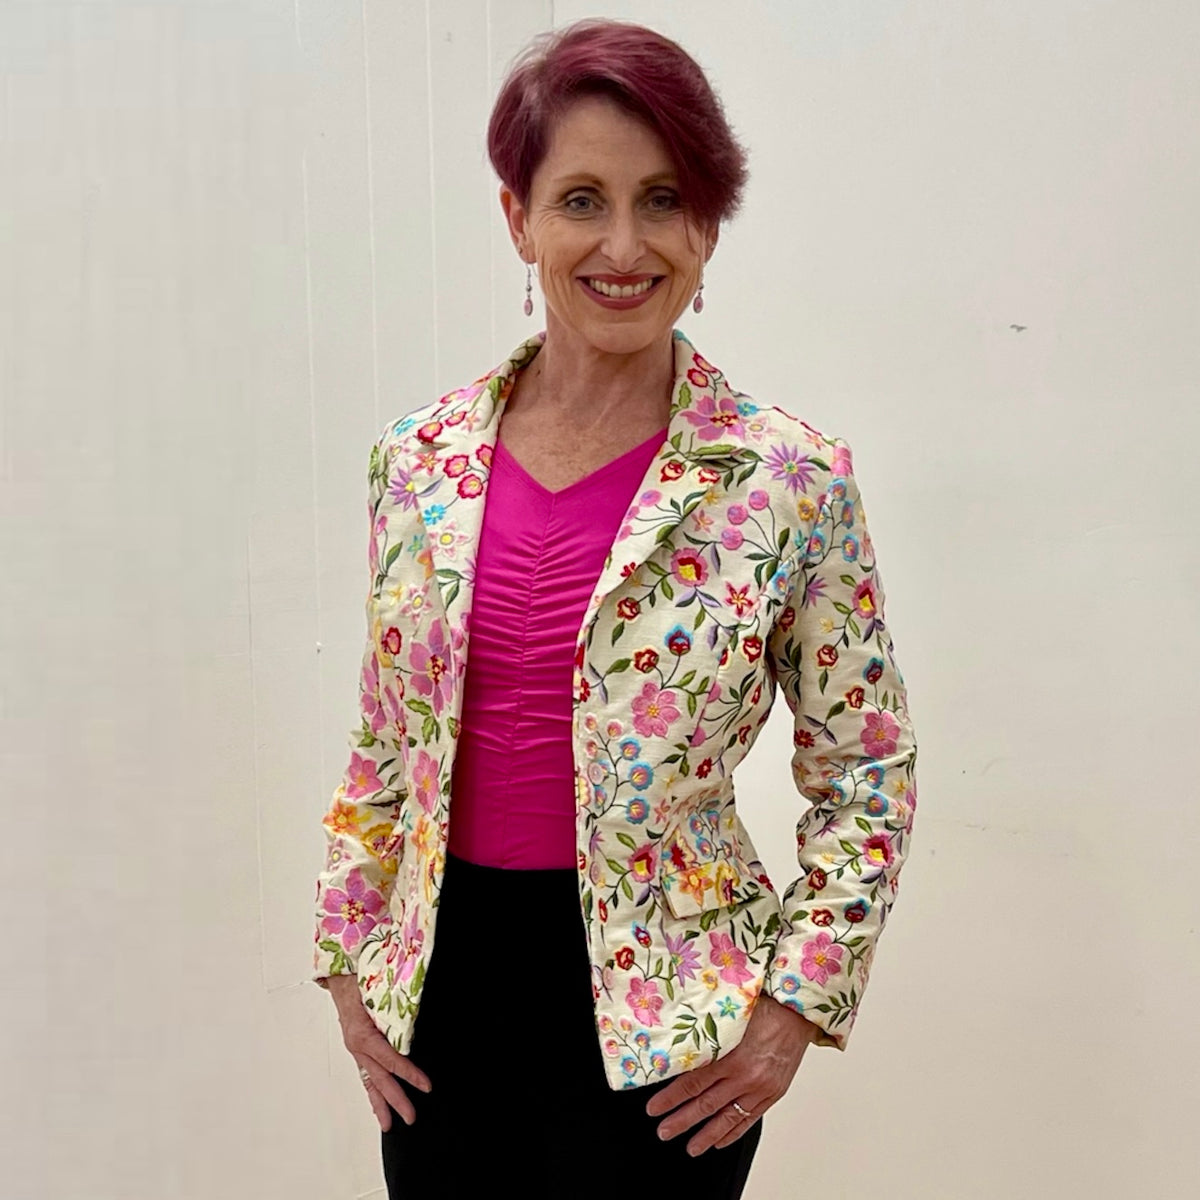 Cream Silk Blend Embroidered Jacket. Floral embroidery in a variety of shades of pink, with teal, gold, reds and greens. Single breasted. 3 gorgeous pink floral buttons.